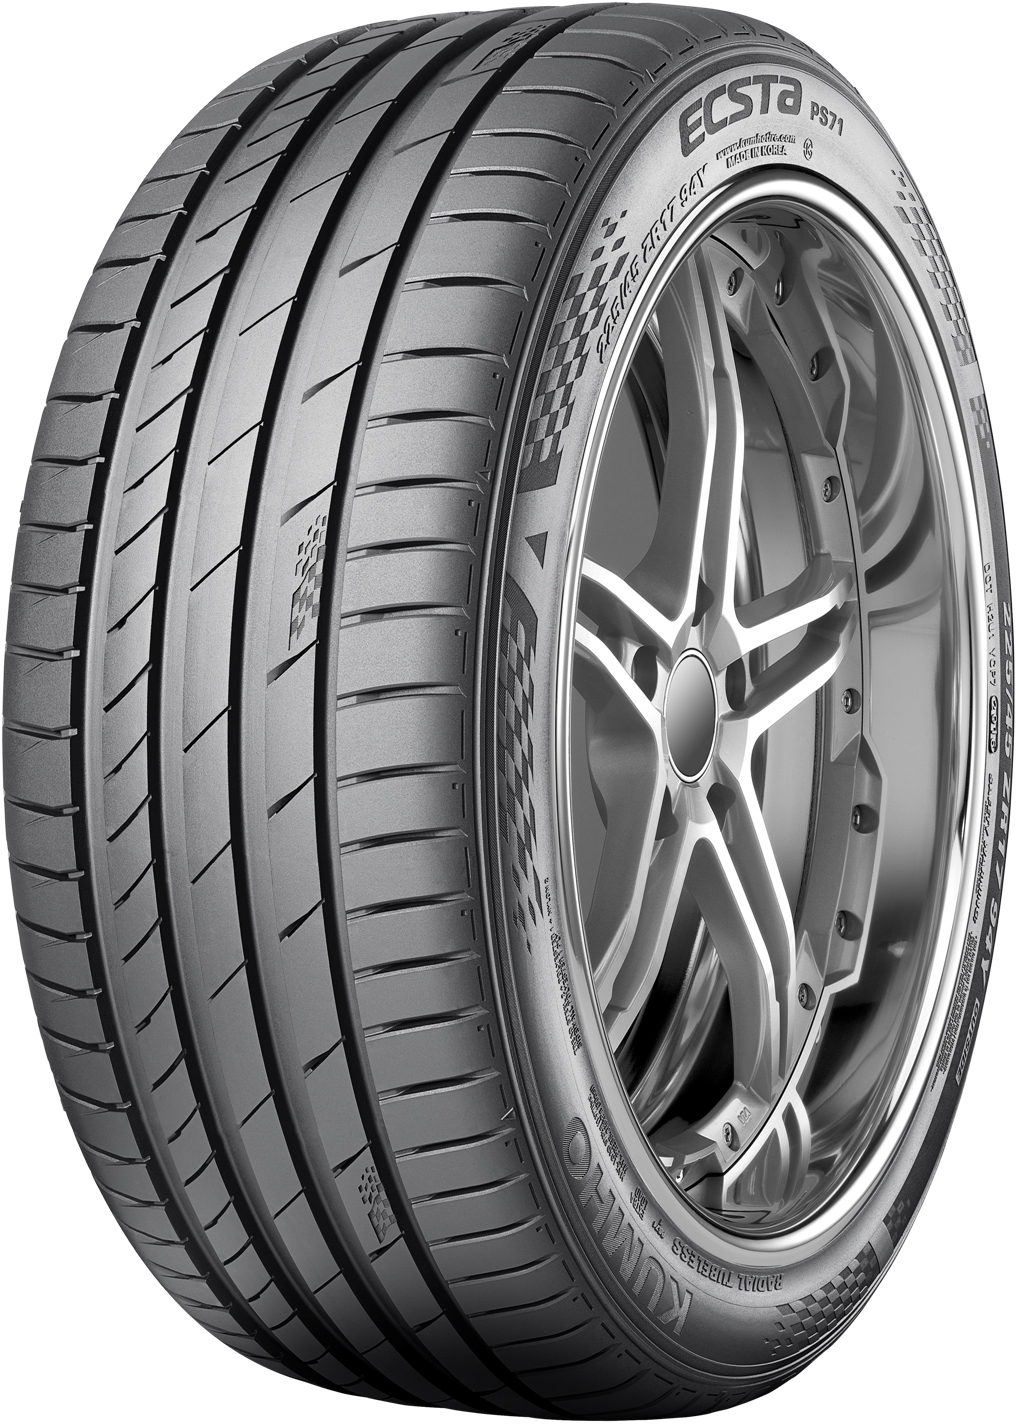 Anvelope auto KUMHO PS71RFT RFT 225/45 R18 91Y